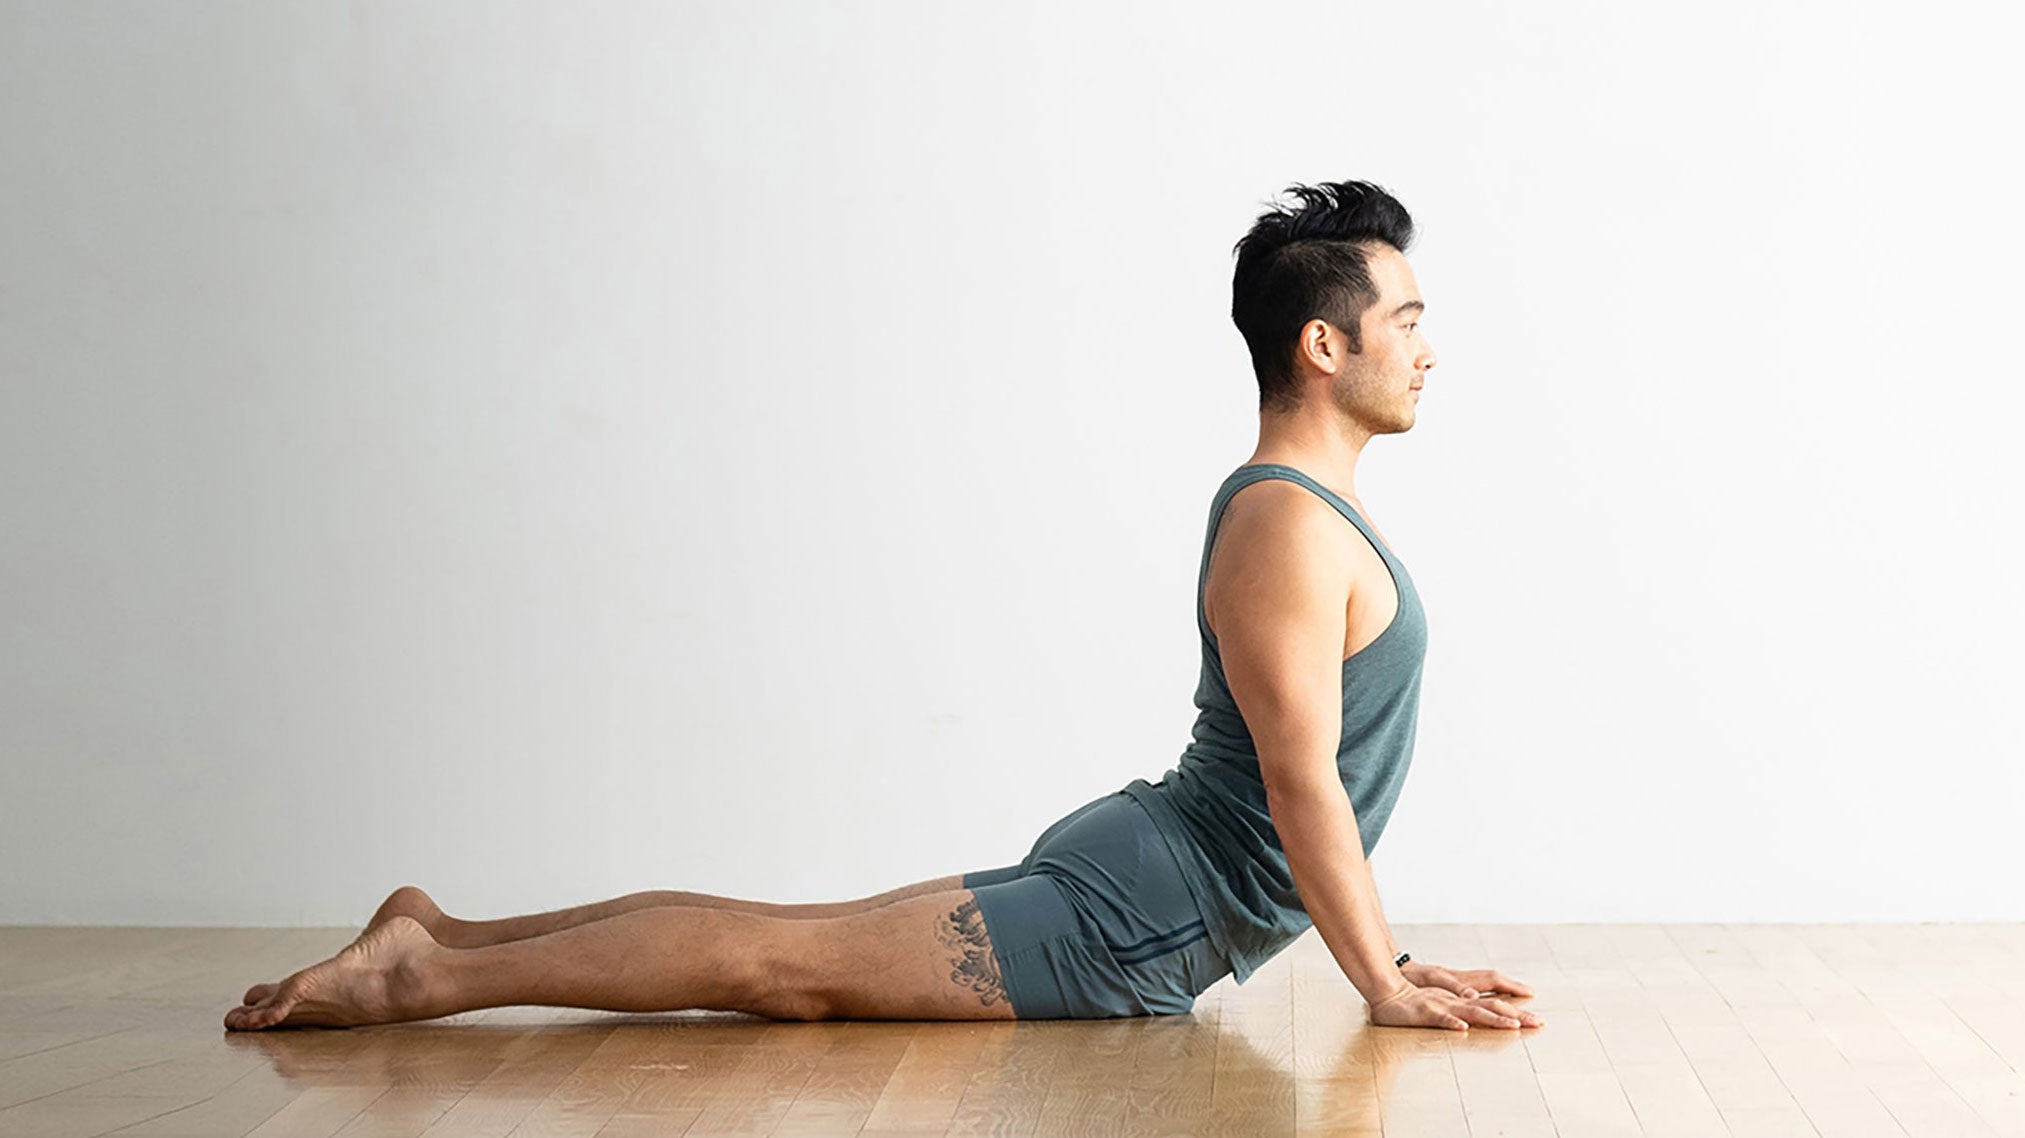 6 Best Yoga Shoulder Stretches to Relieve Neck and Back Pain